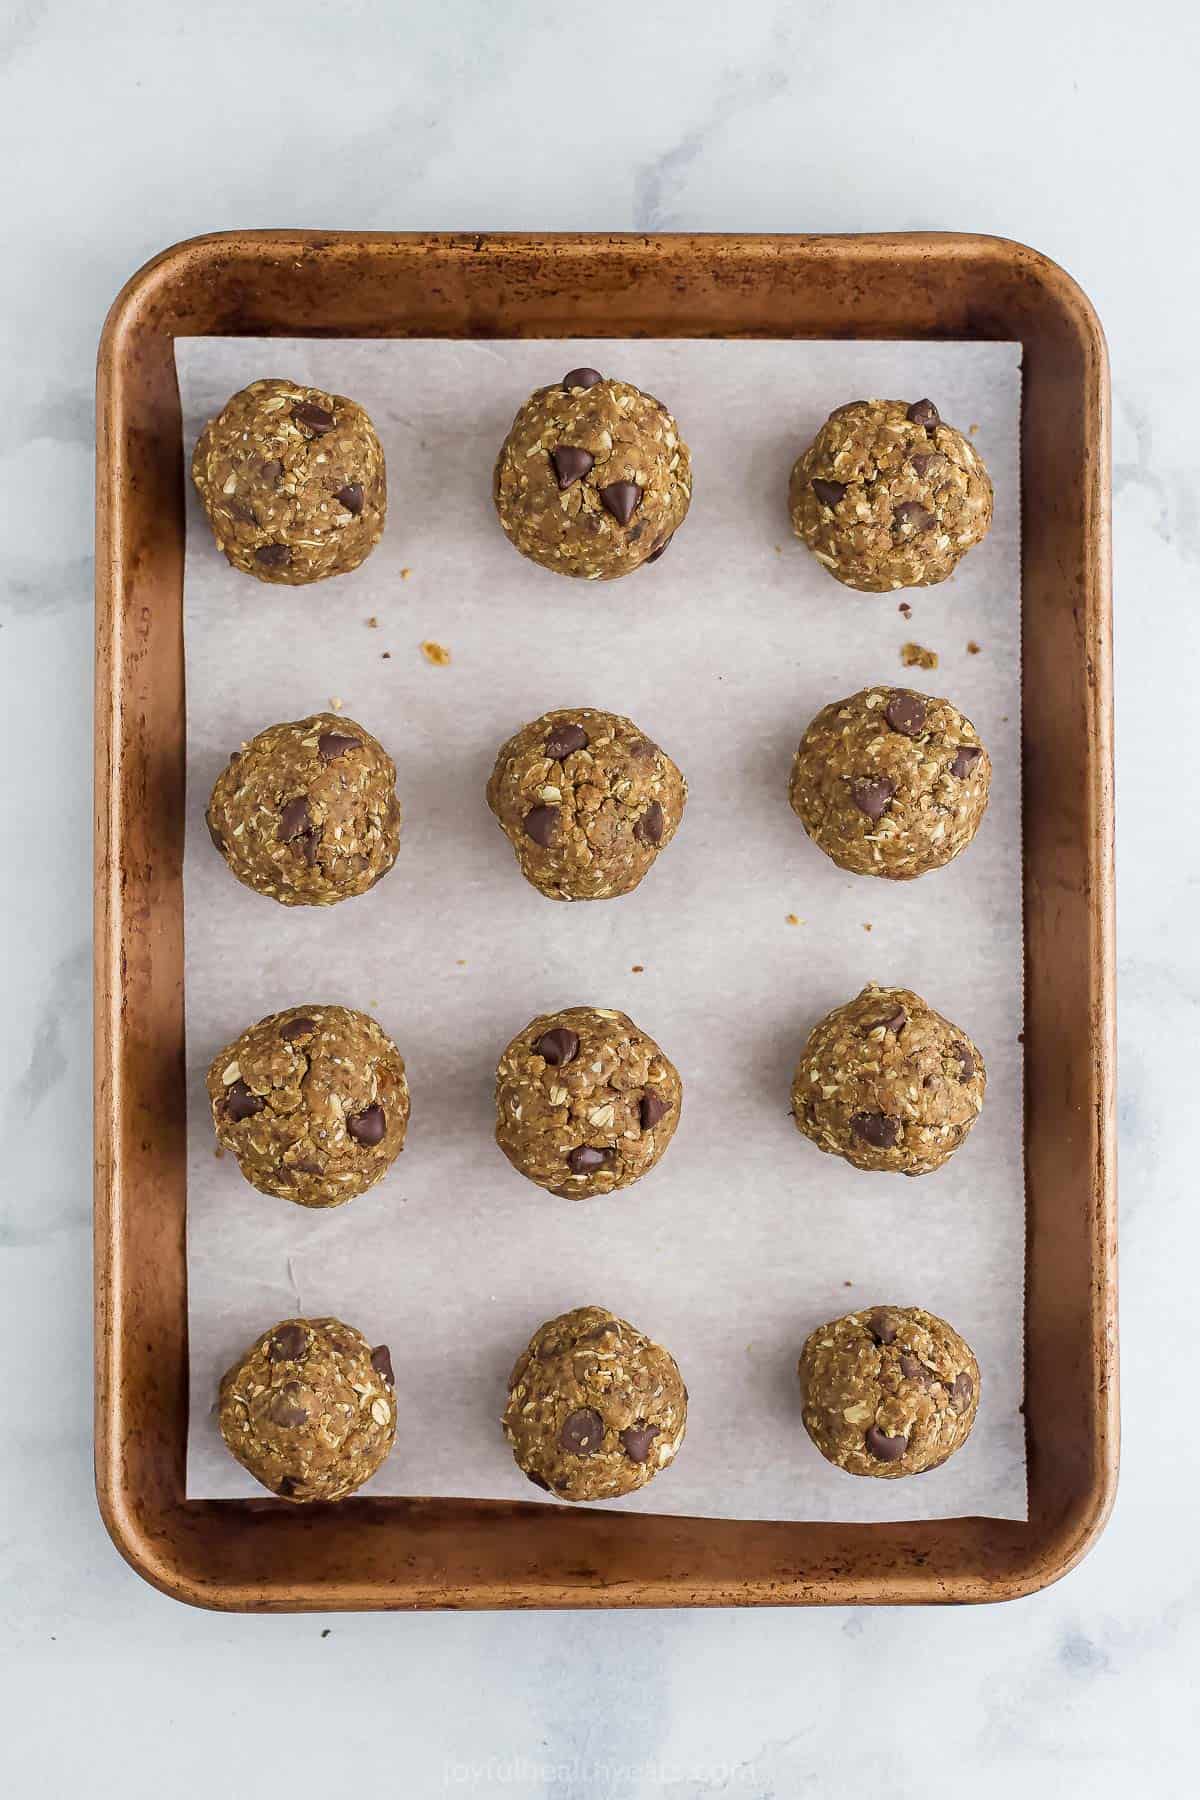 Twelve peanut butter chocolate chip protein balls evenly spaced on a baking sheet lined with parchment paper